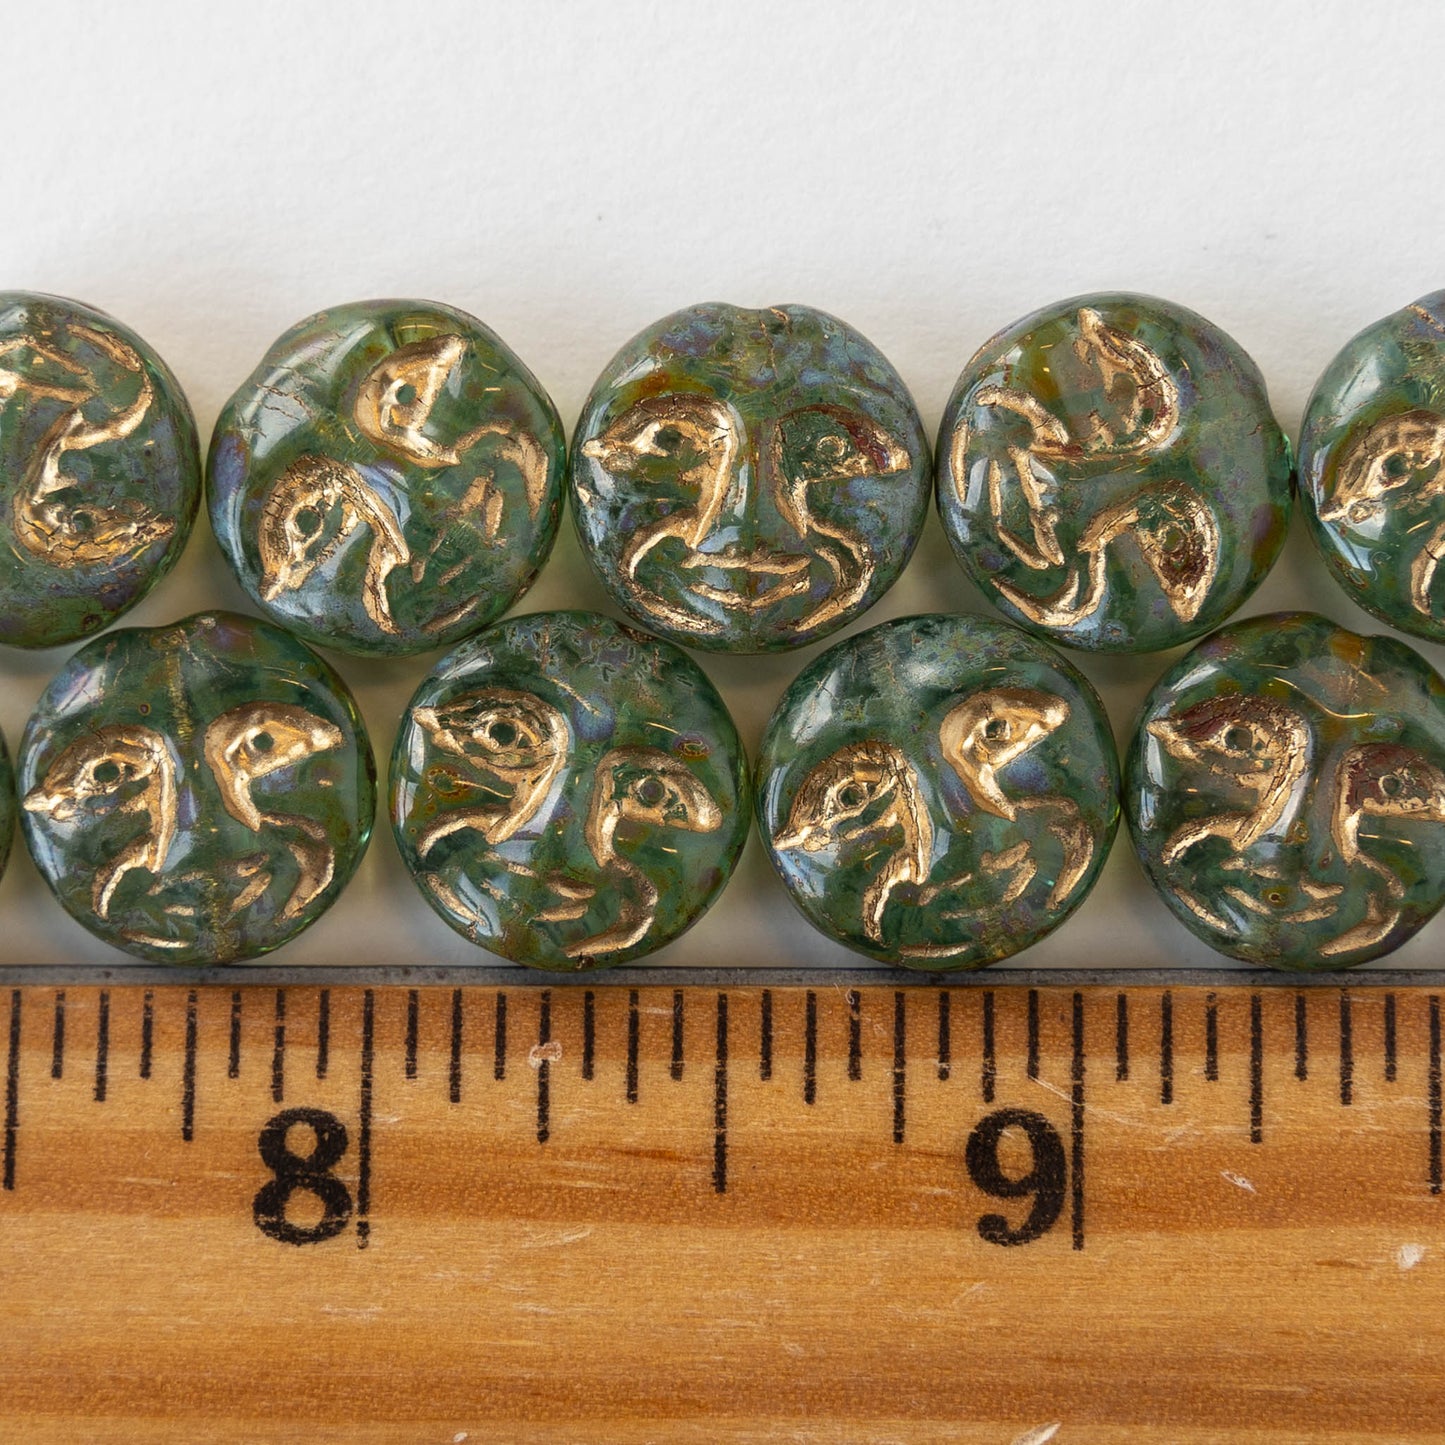 13mm Full Moon Coin Beads - Aqua Green with Picasso Finish and Gold Wash - 6 beads